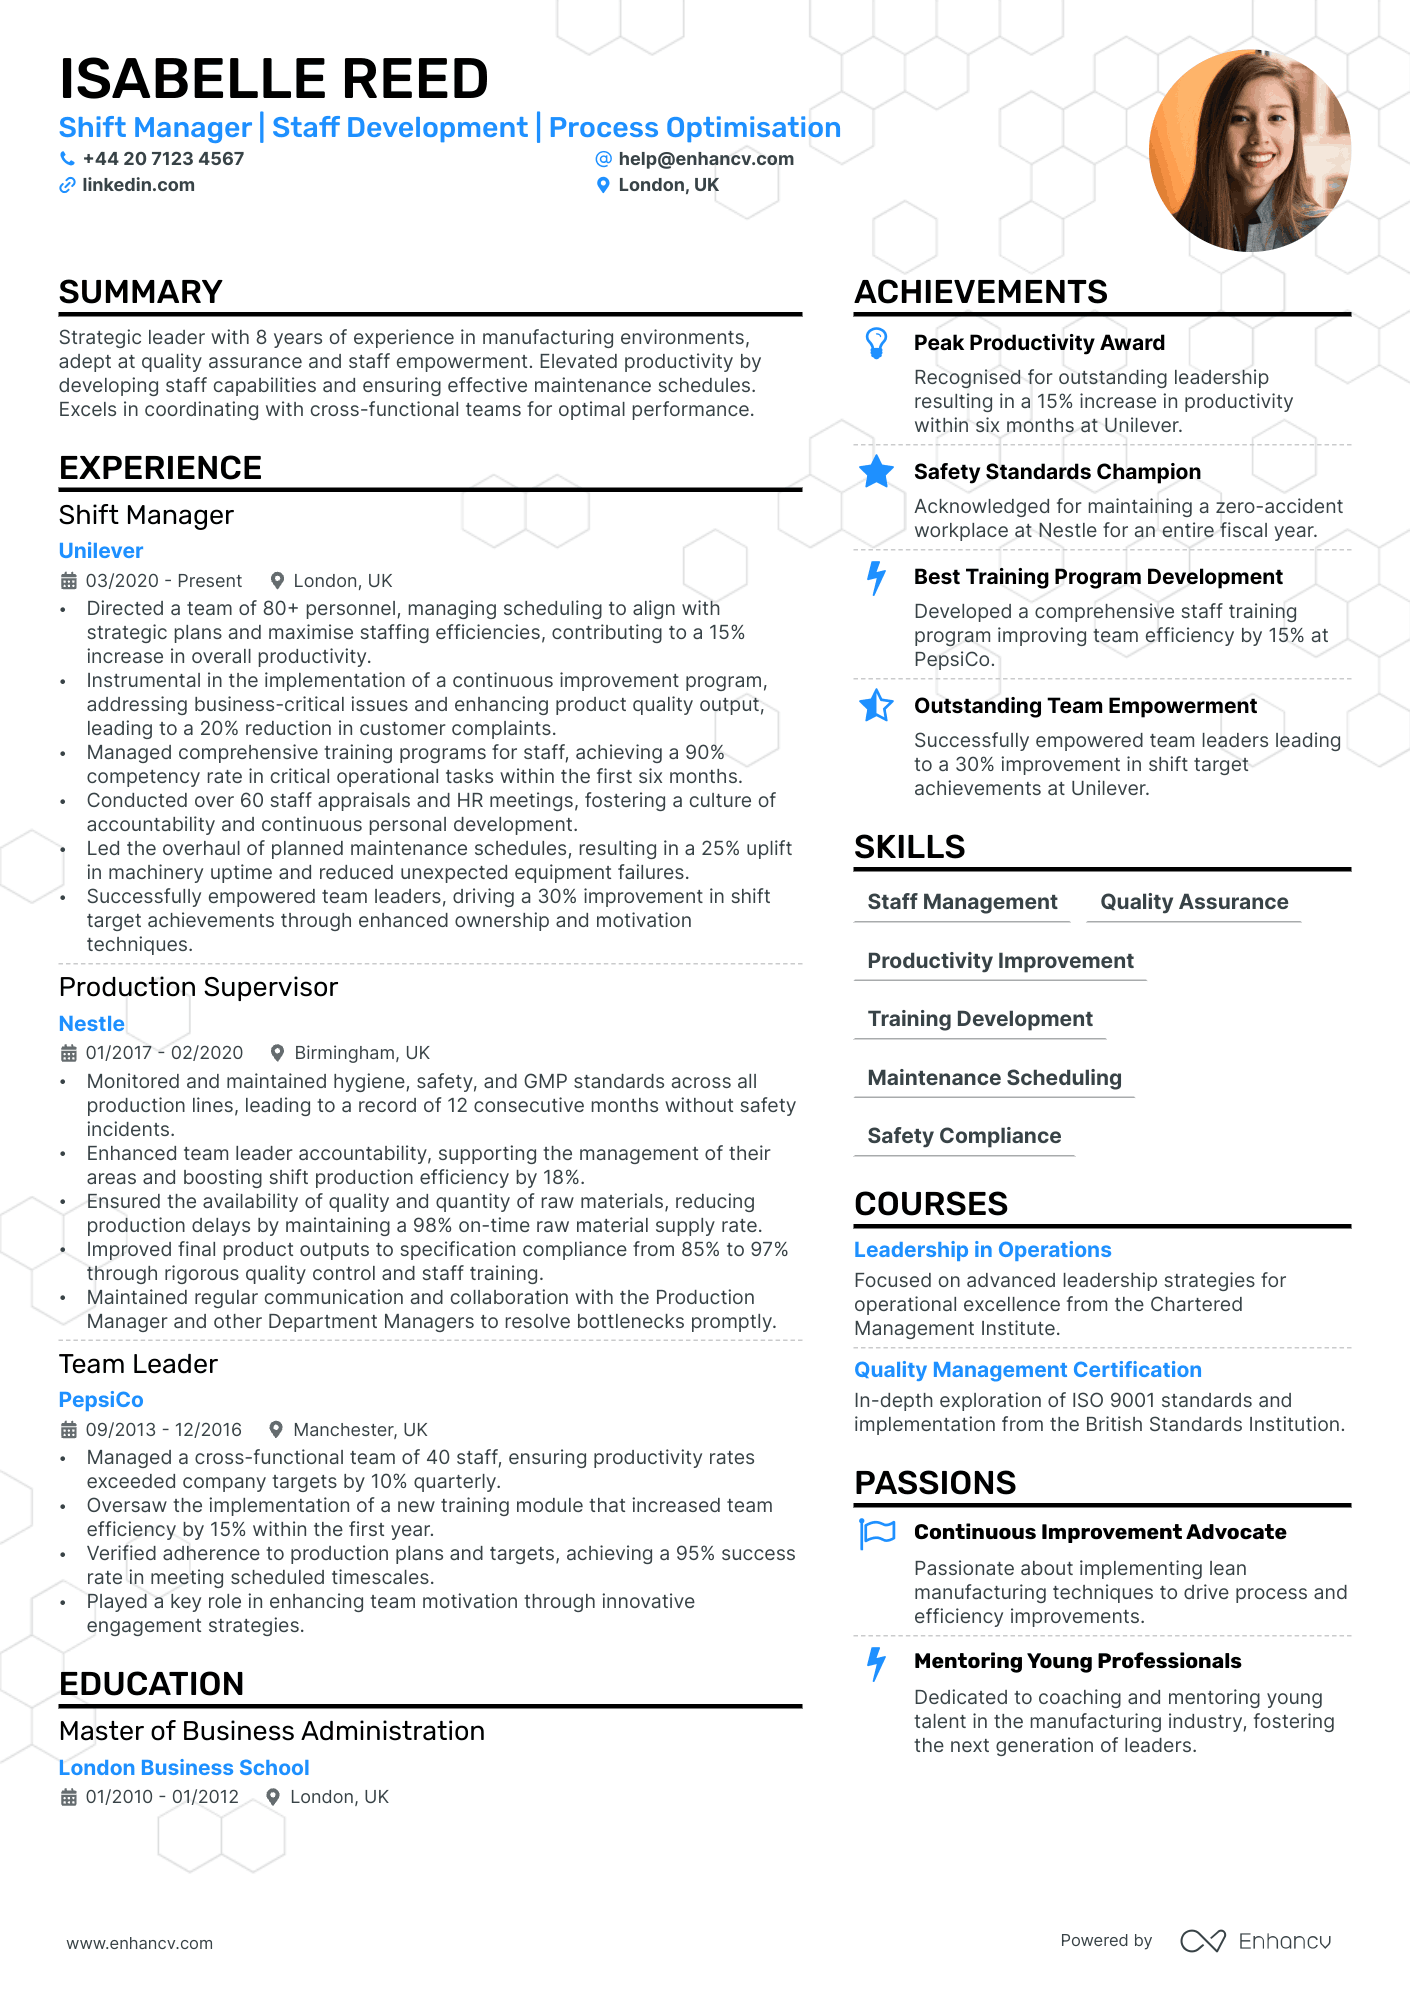 Shift Manager cv example